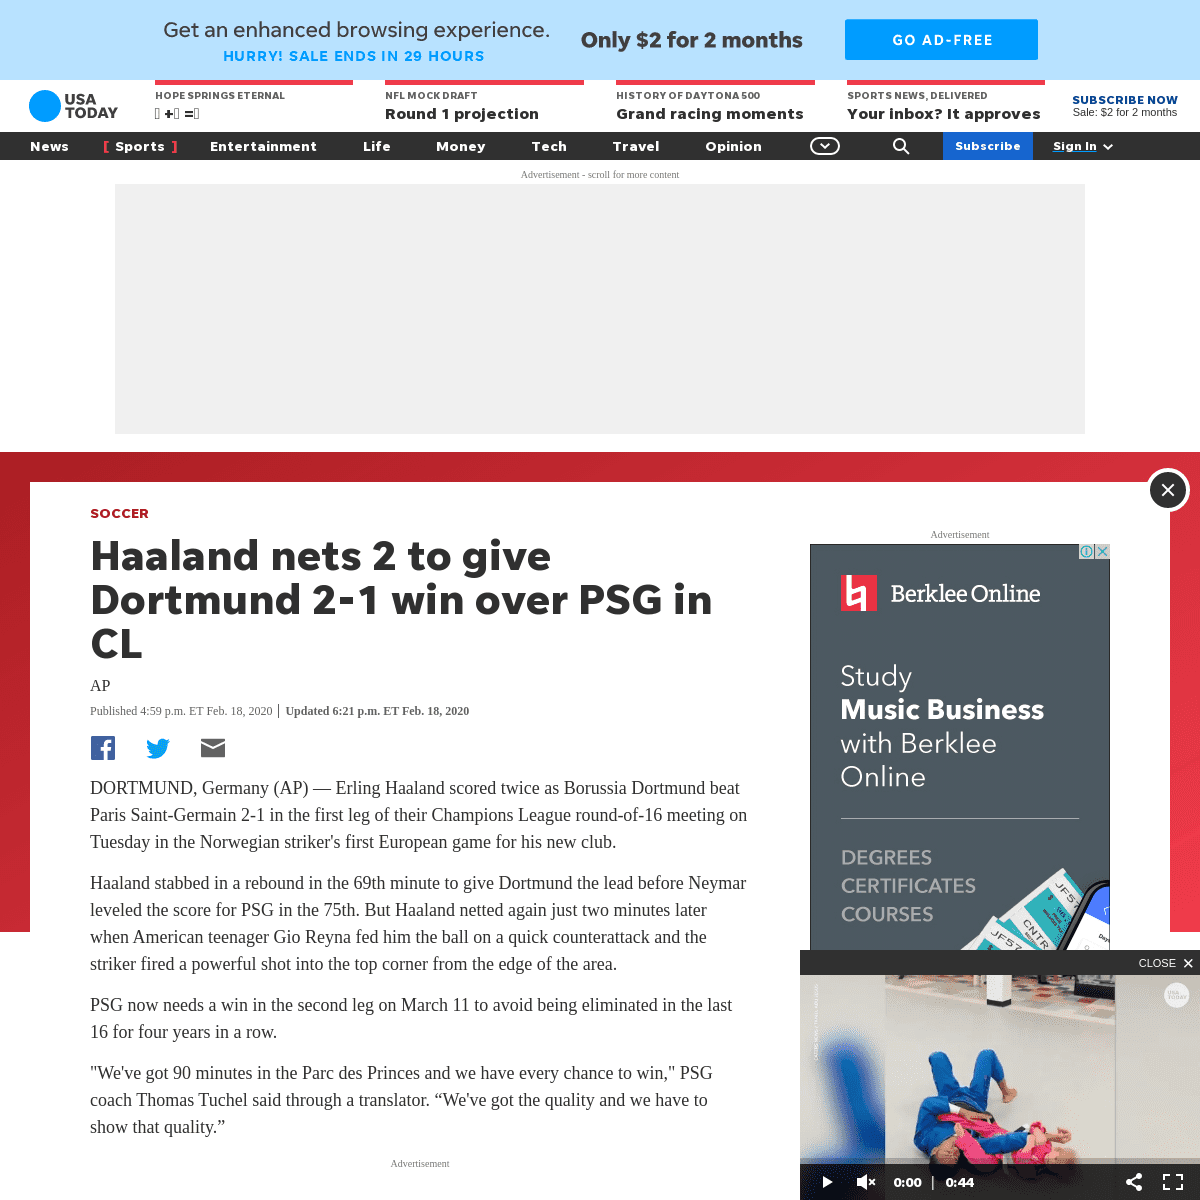 A complete backup of www.usatoday.com/story/sports/soccer/2020/02/18/haaland-nets-2-to-give-dortmund-2-1-win-over-psg-in-cl/1113